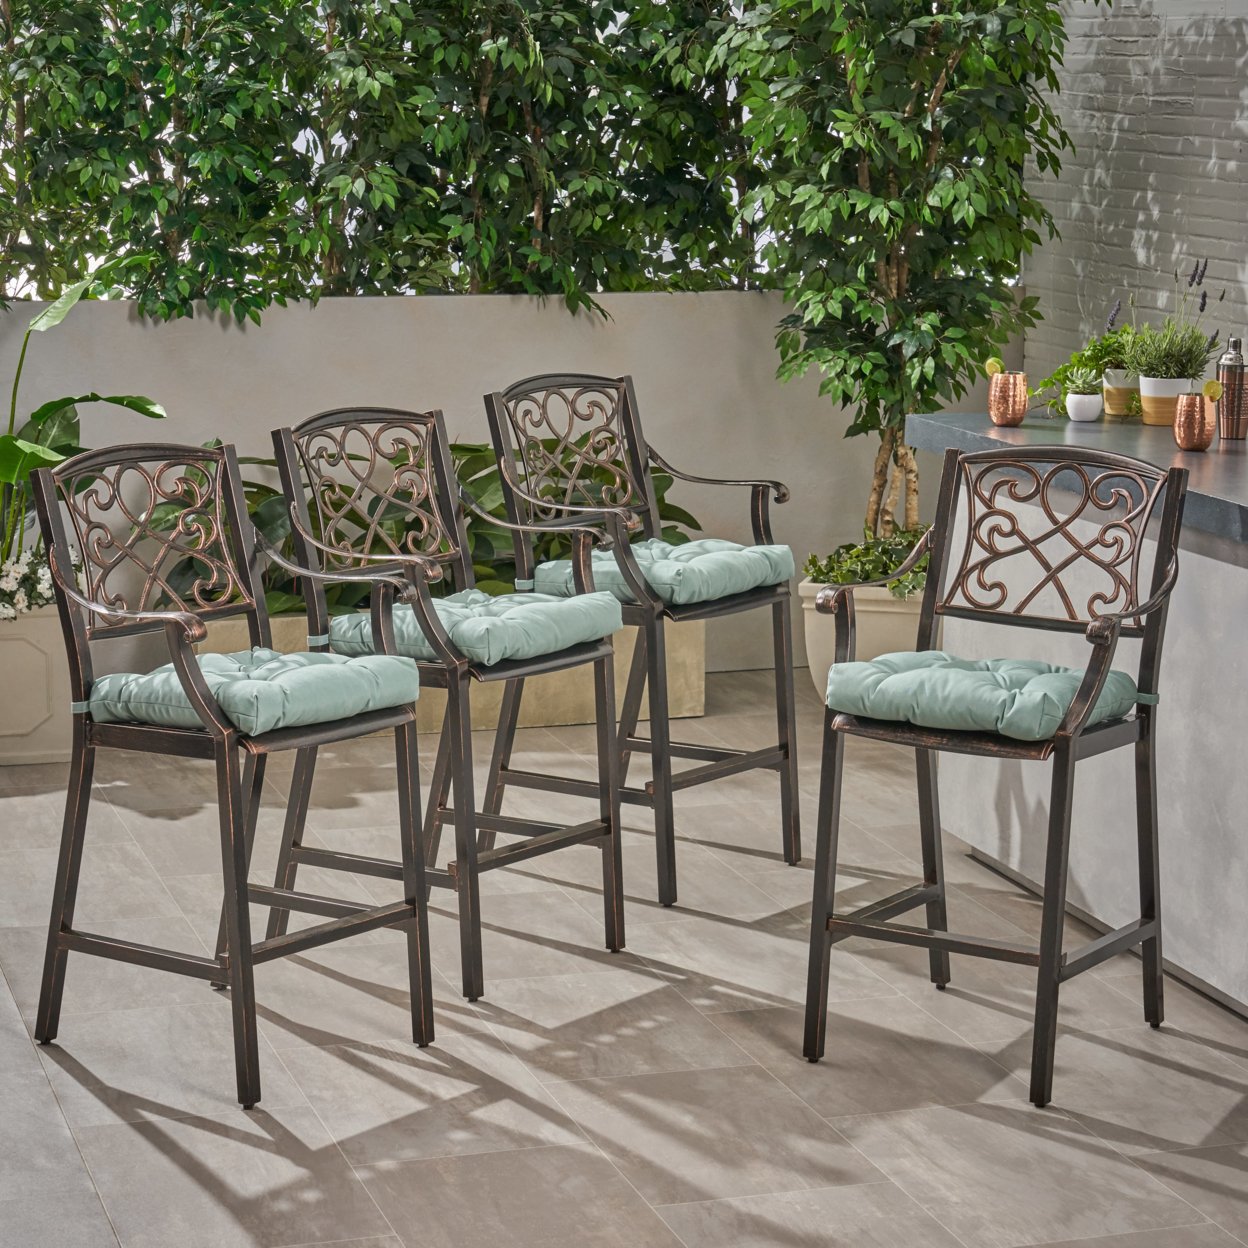 Deirdre Outdoor Barstool With Cushion (Set Of 4) - Shiny Copper + Teal